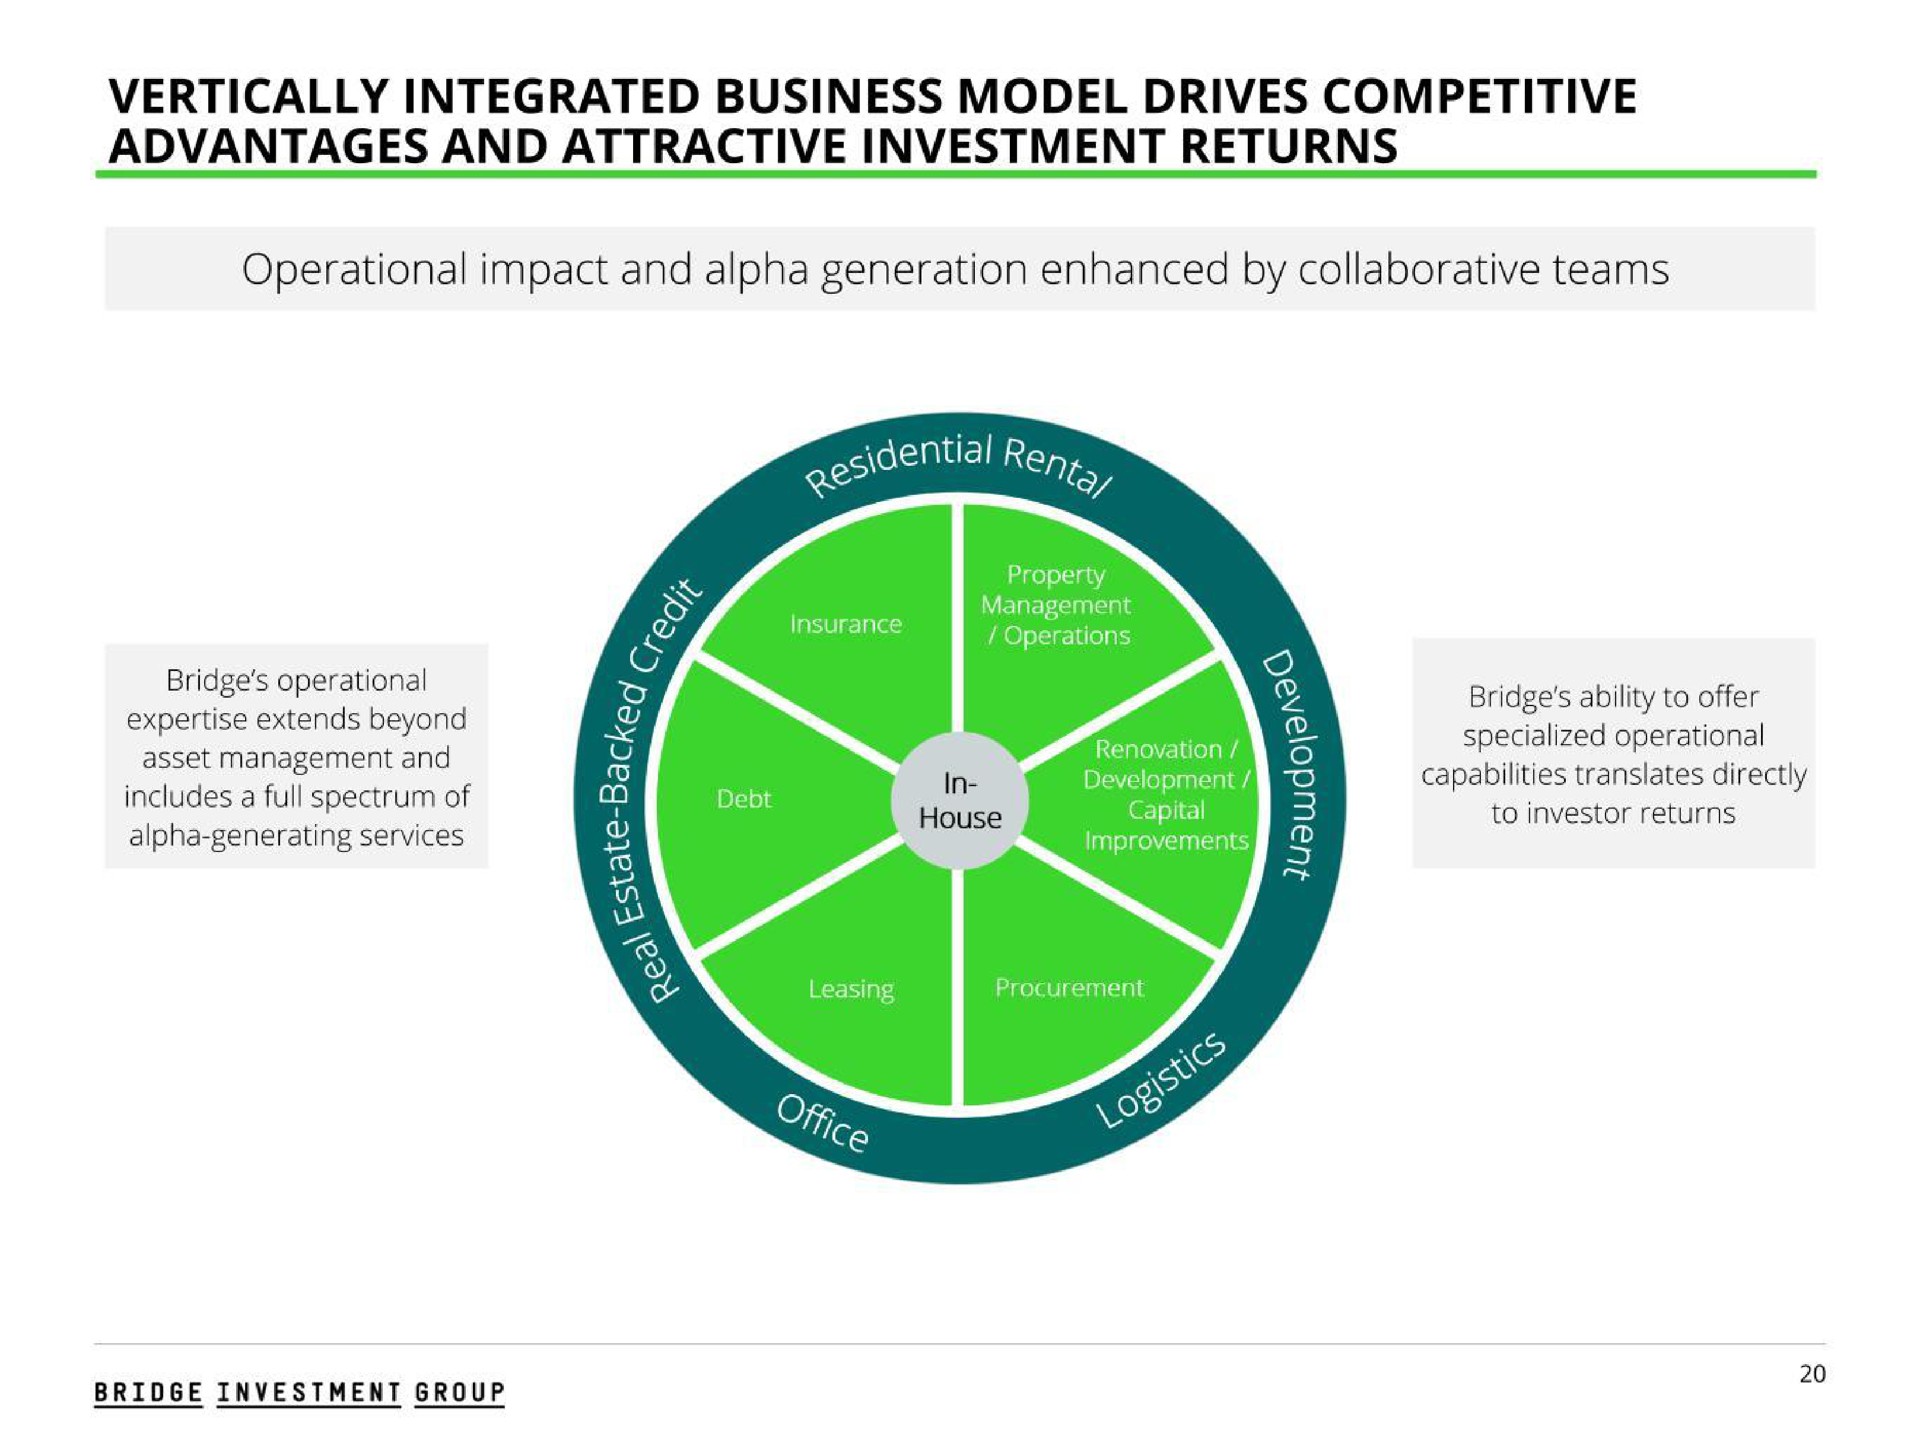 vertically integrated business model drives competitive advantages and attractive investment returns operational impact and alpha generation enhanced by collaborative teams | Bridge Investment Group